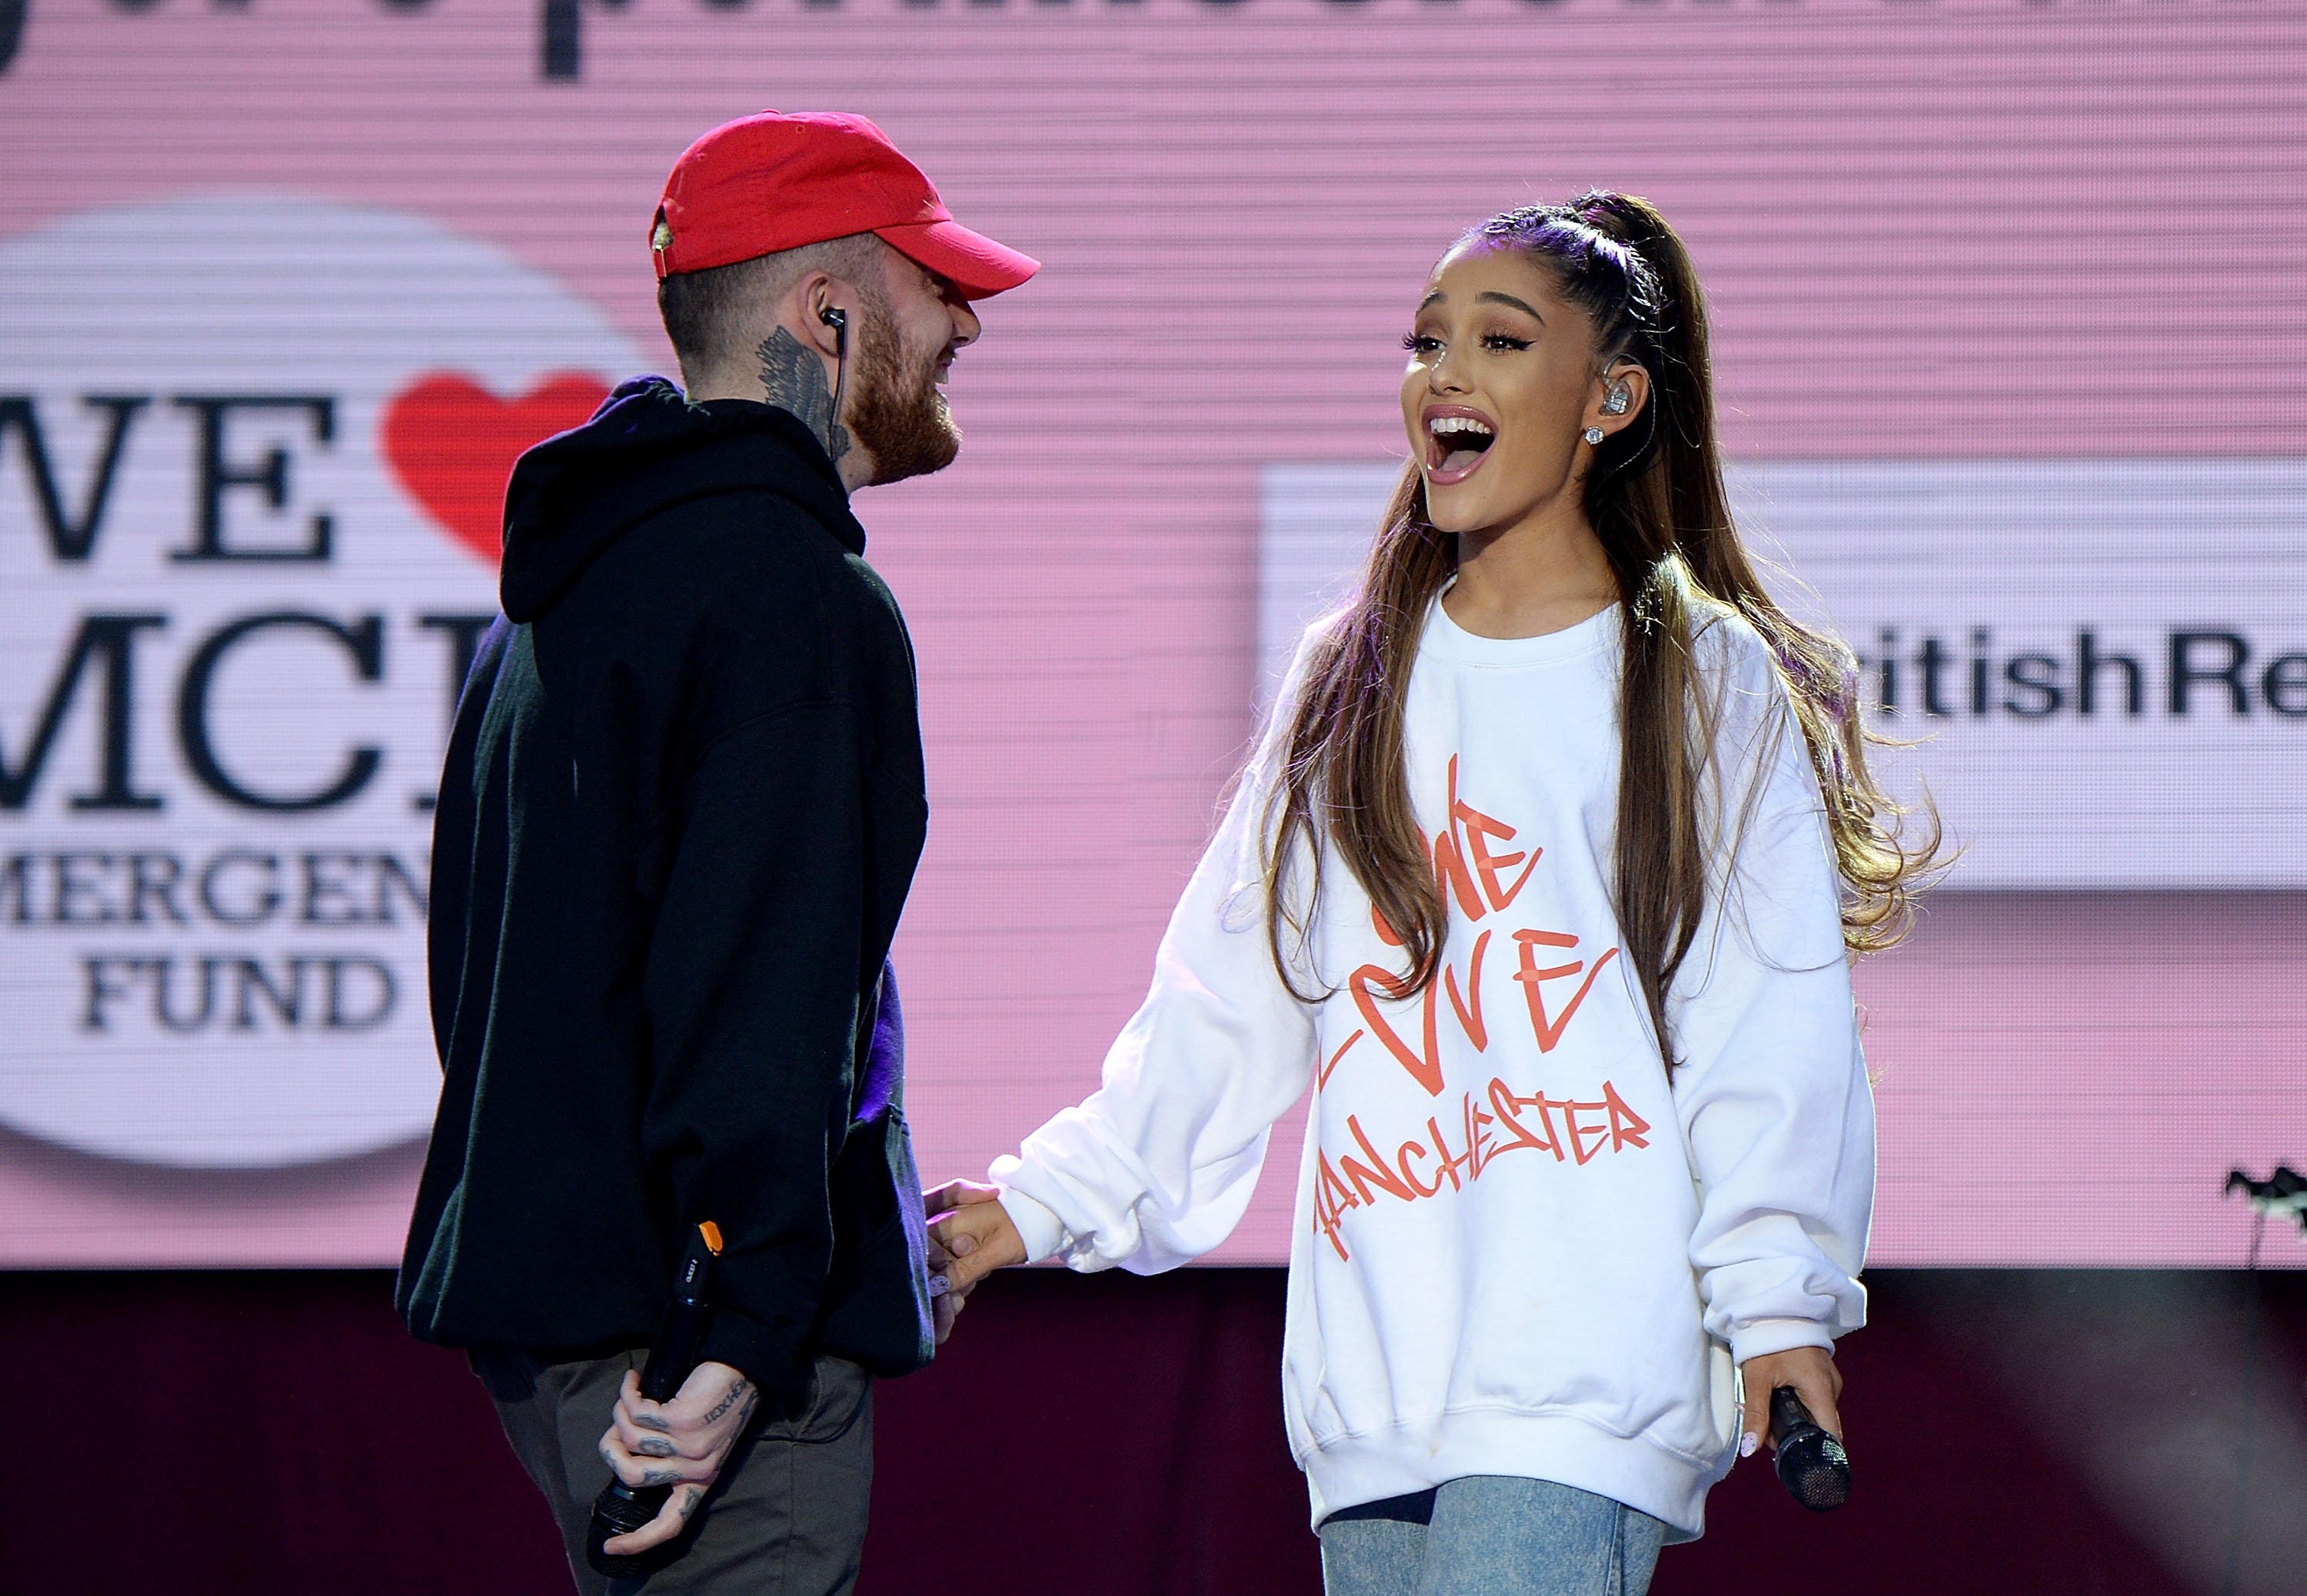 How Do Ariana Grande’s Collaborations With Mac Miller Rank Among Her Top Hits?